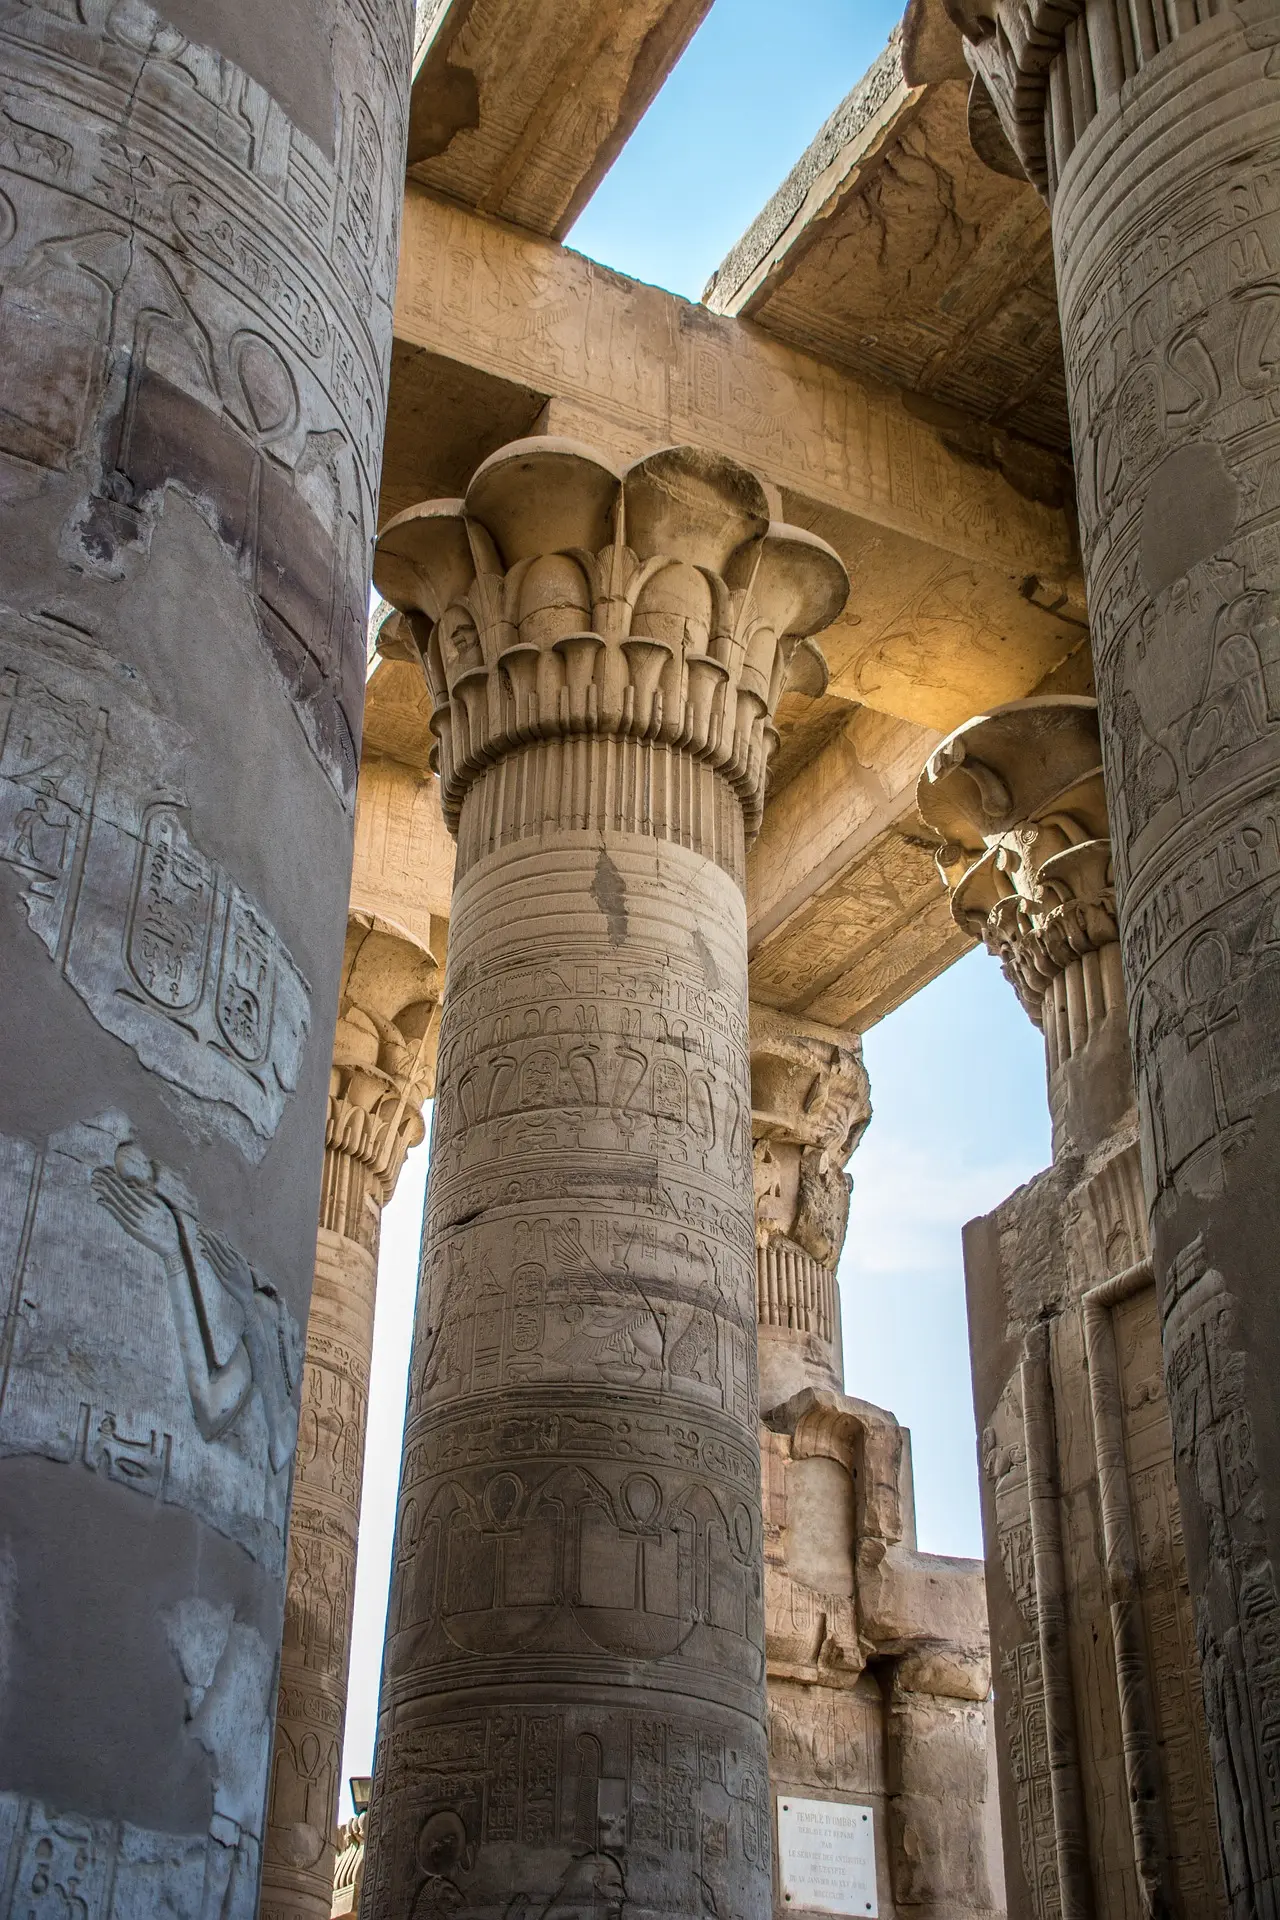 The Temple of Horus at Edfu in Egypt